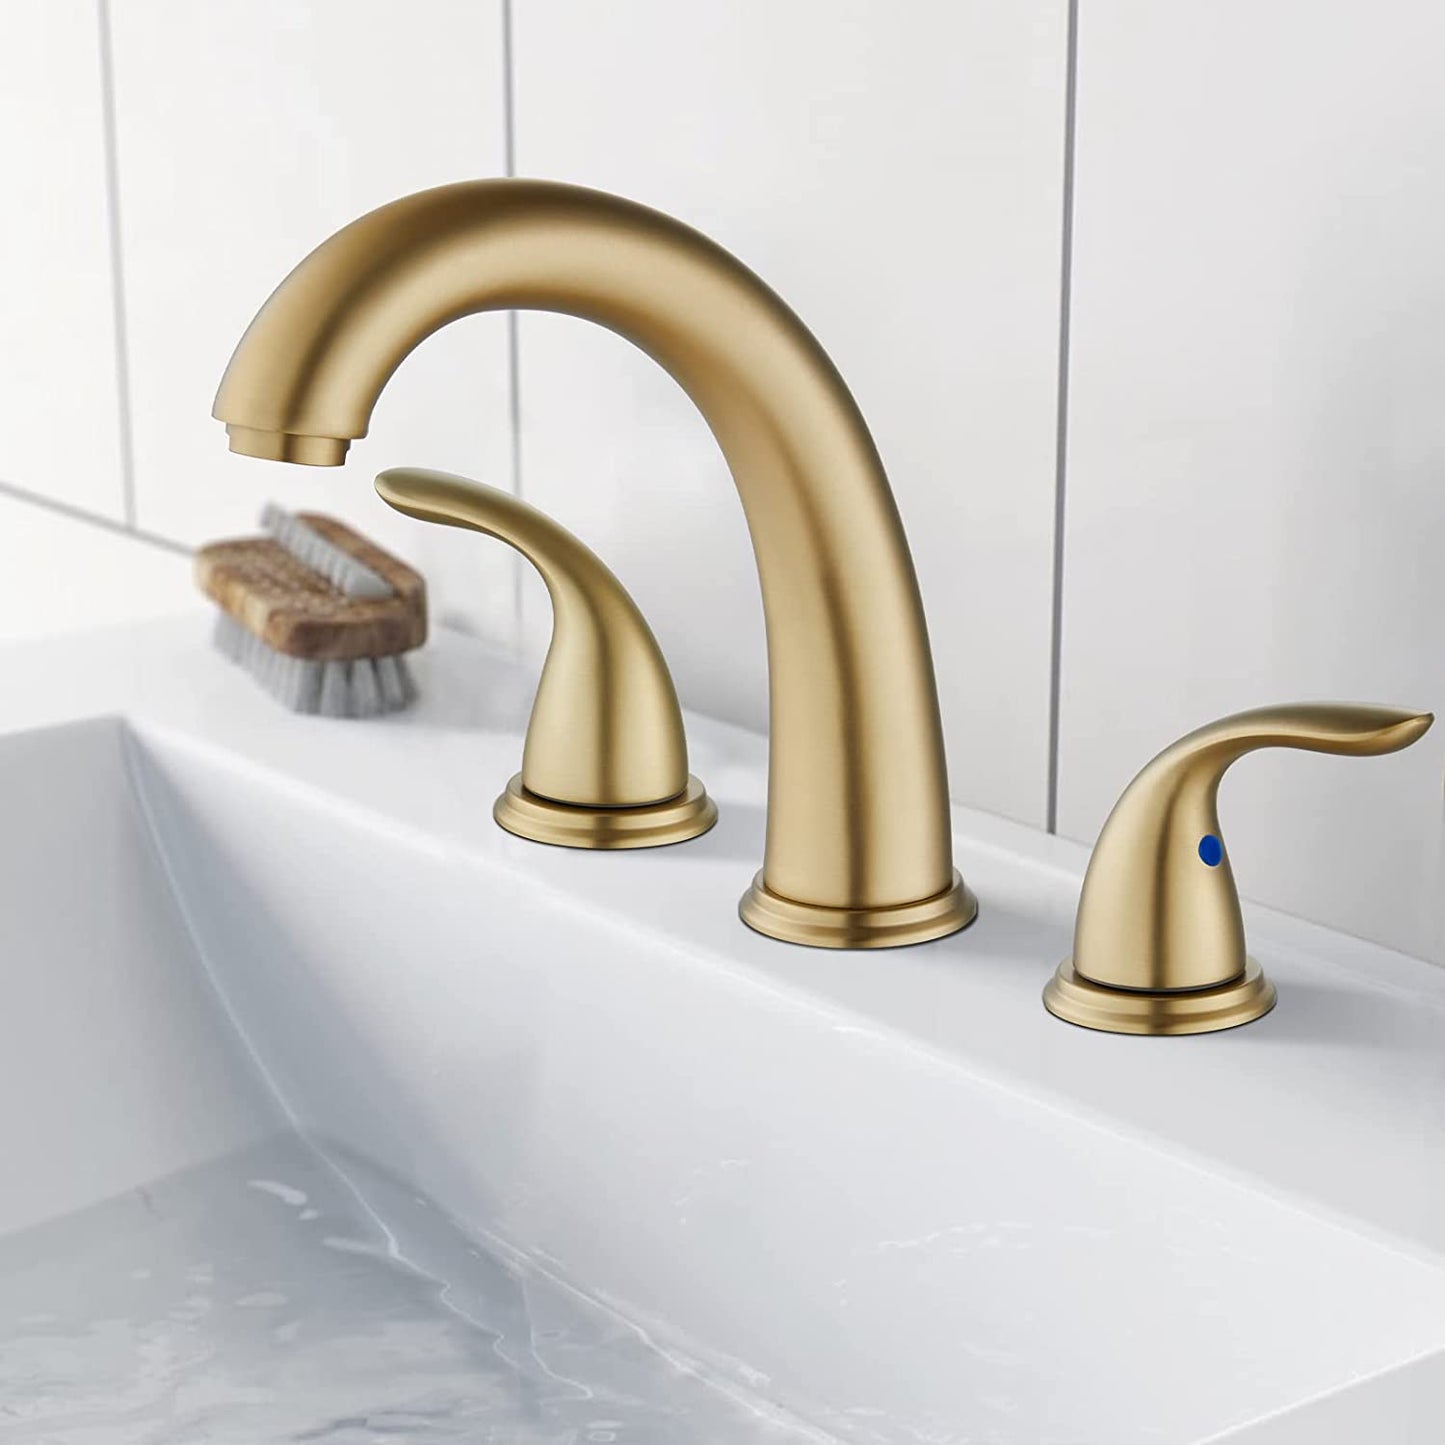 
                  
                    Cinwiny 8” Widespread Bathroom Faucet Deck Mount Three Holes Brass Valve Sink Lavatory Stainless Steel Faucet Two Handles Mixer Tap with Pop up Drain Stopper
                  
                